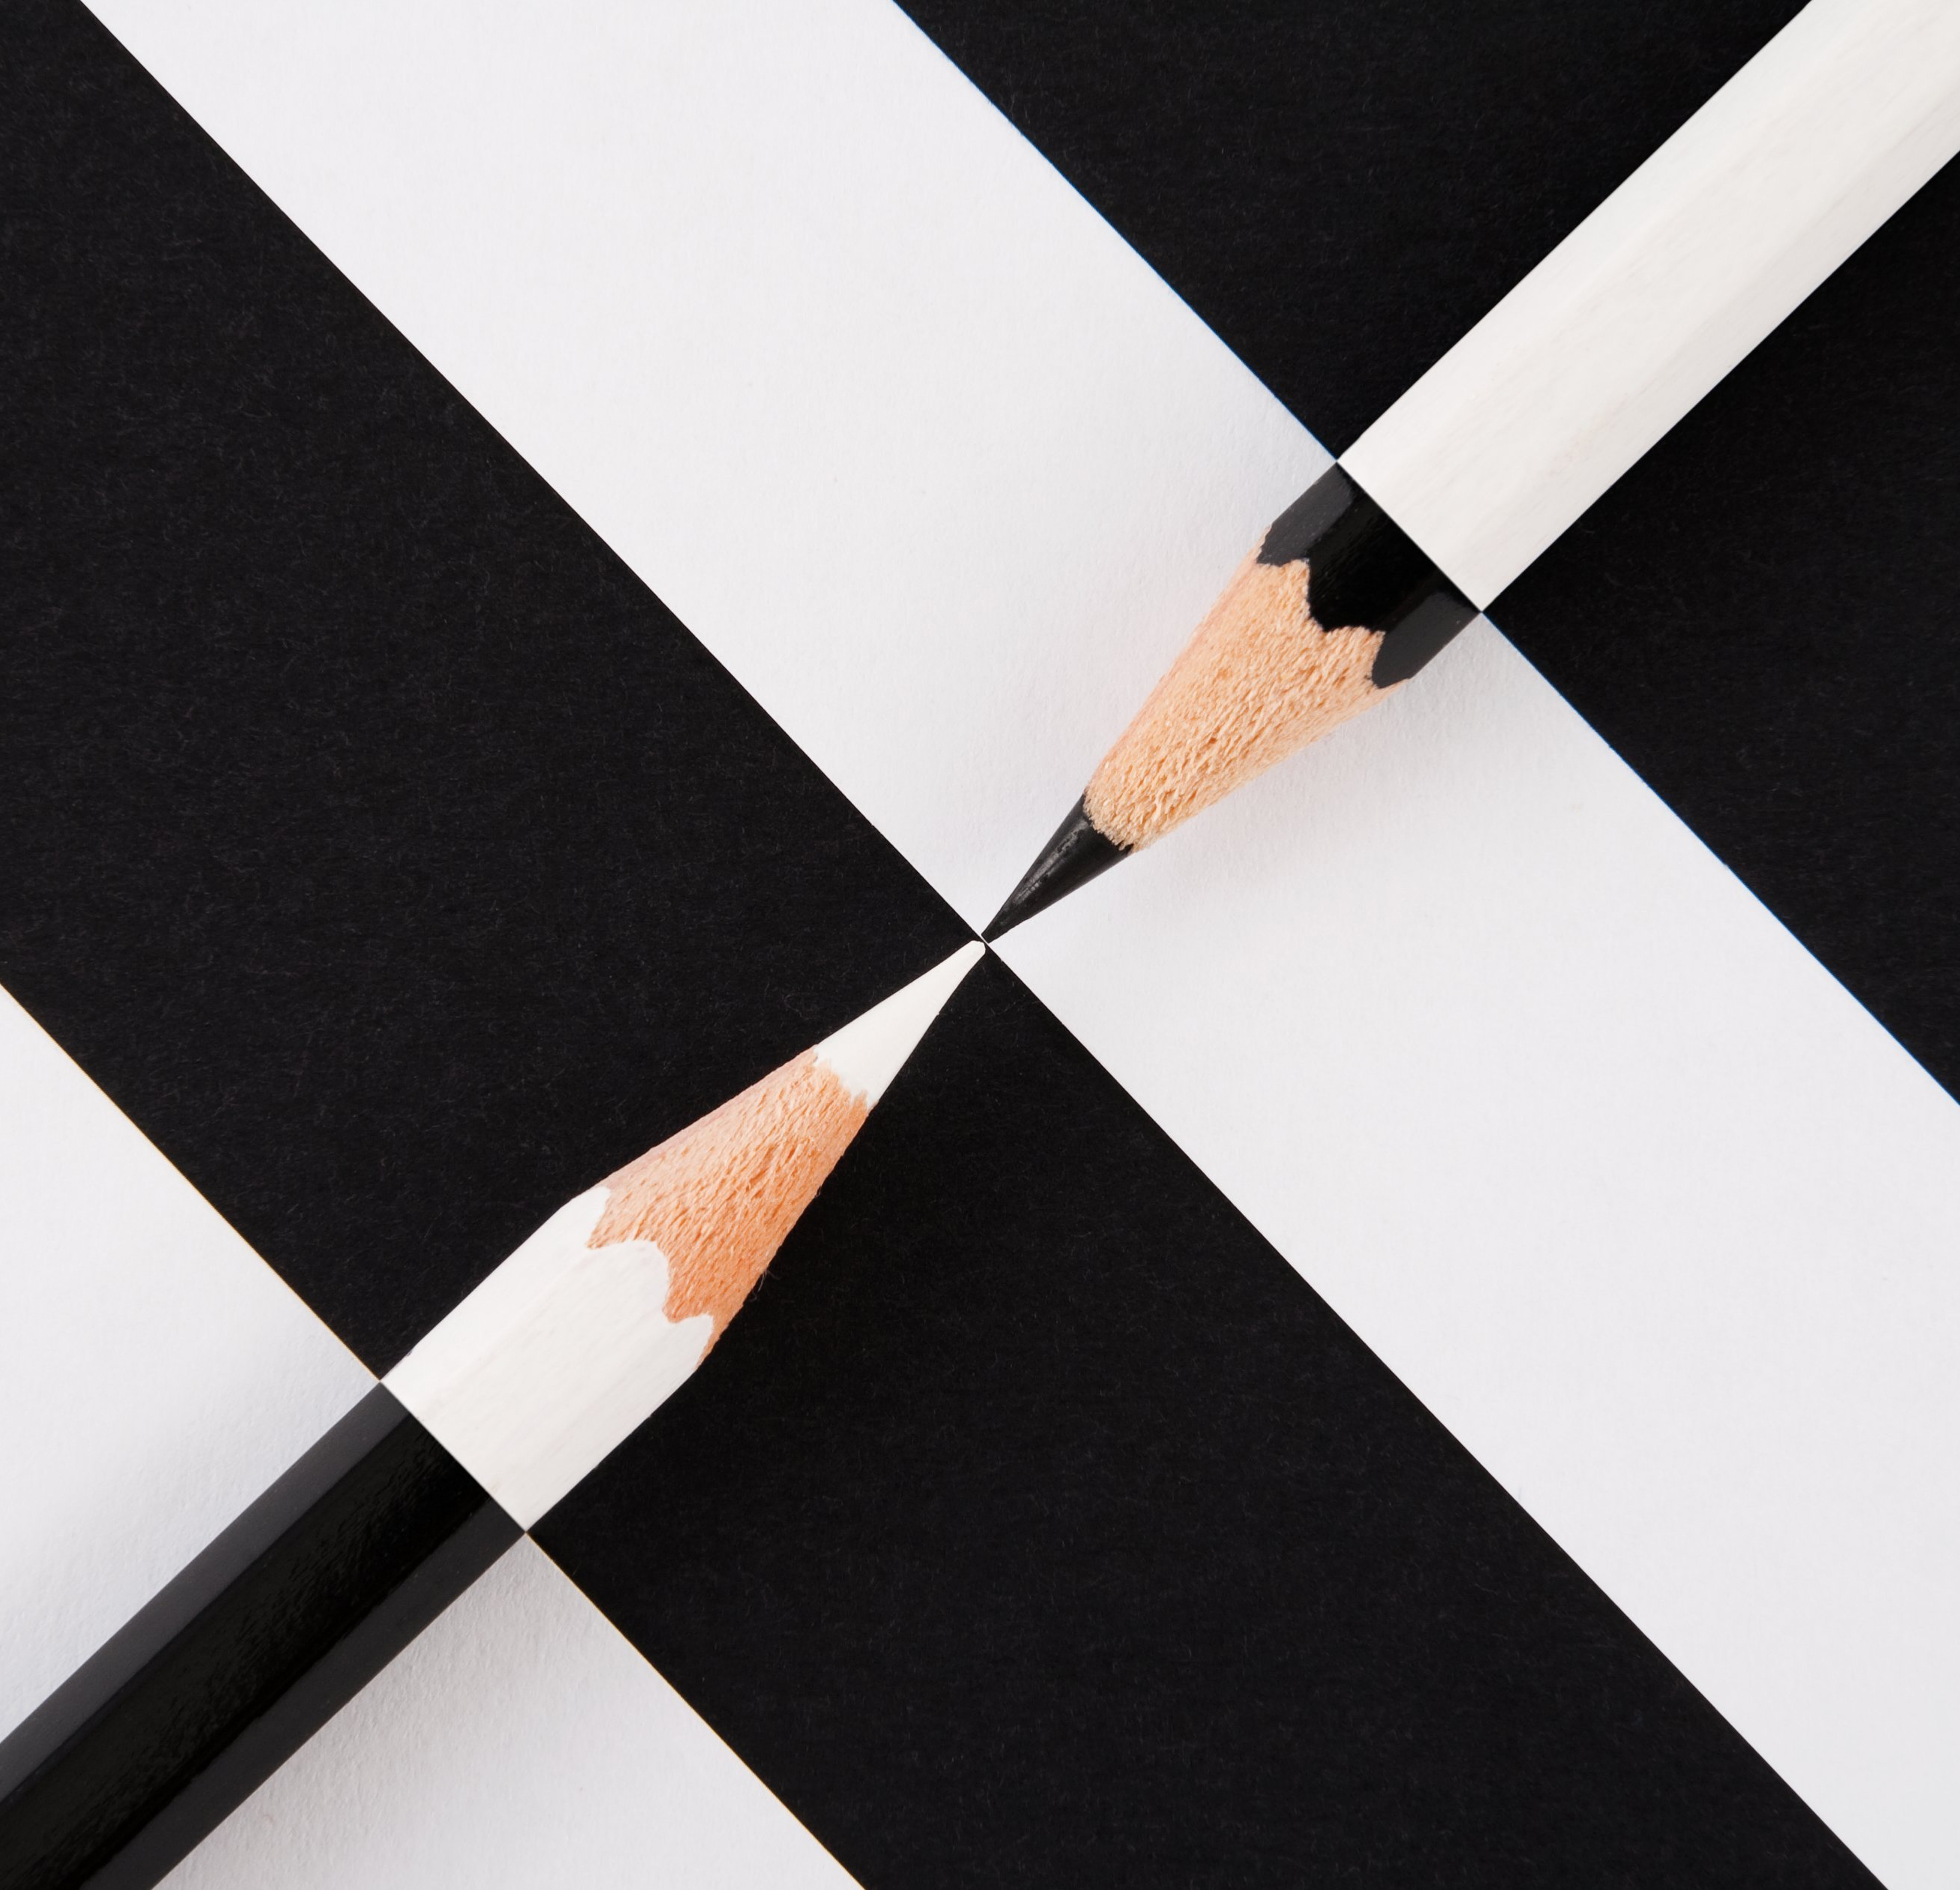 A black pencil and white pencil pointing at each other on a black and white background